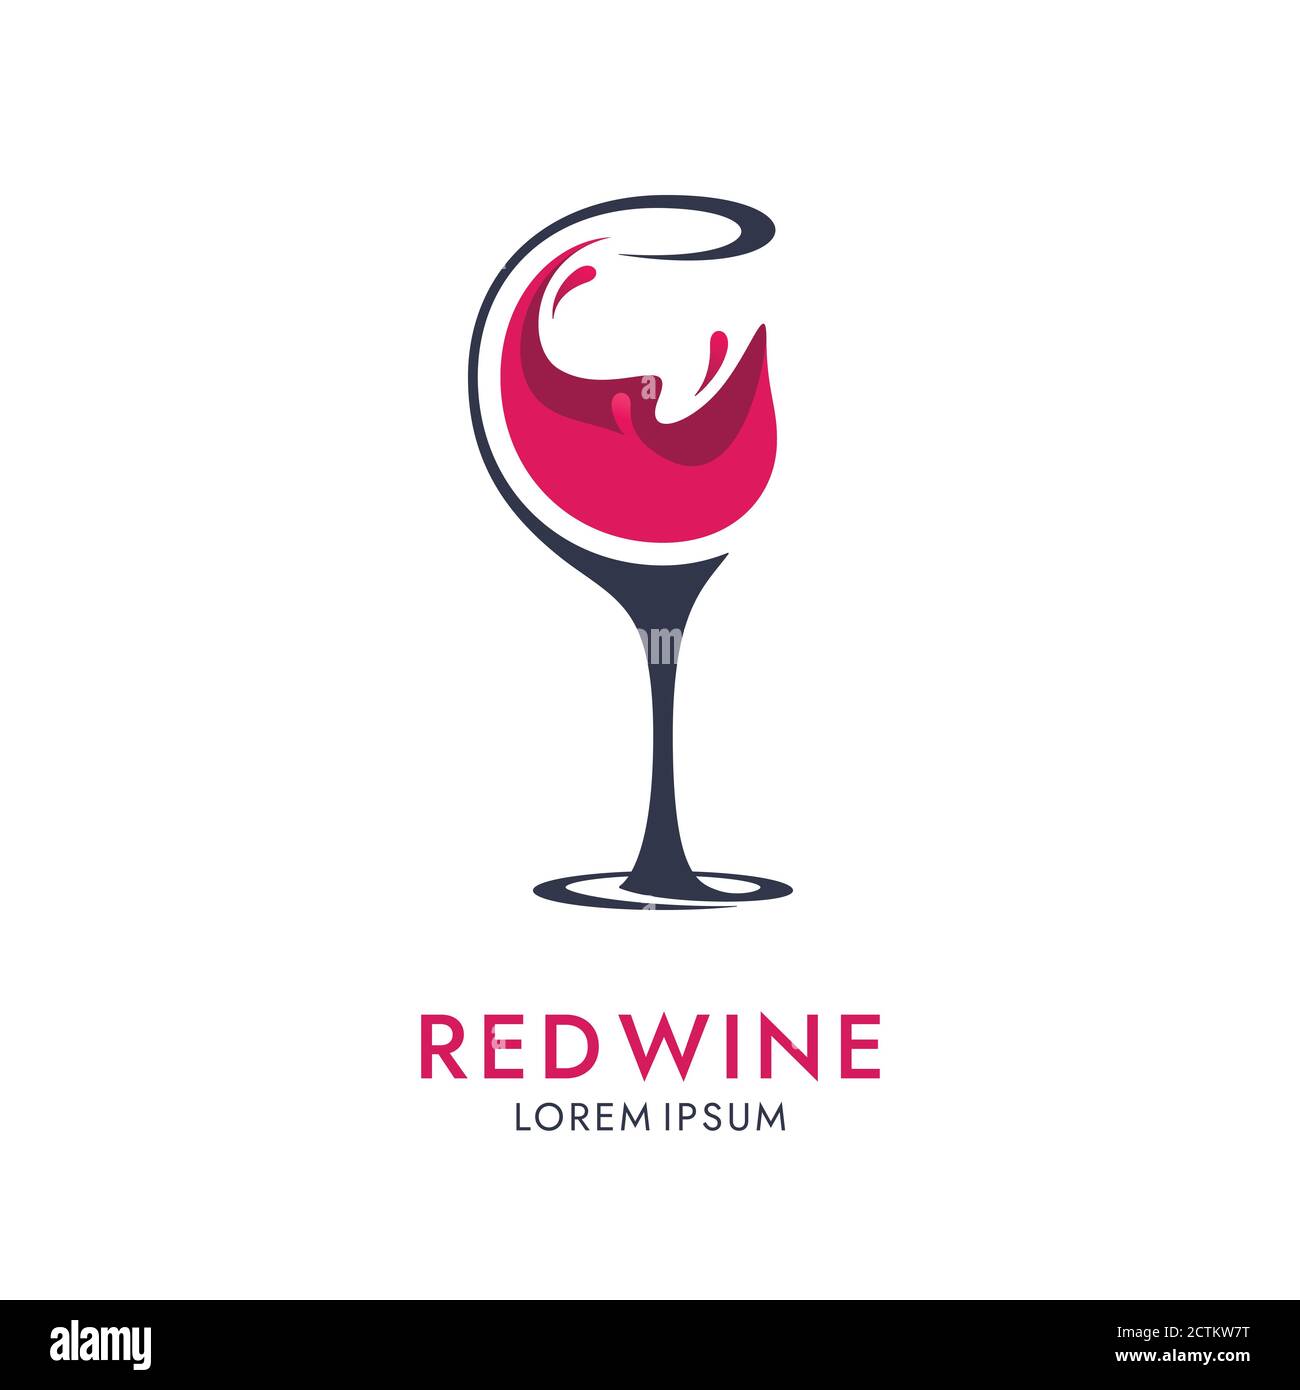 Wine icon with cut glass on white background. Abstract drink logo design. Stock Vector